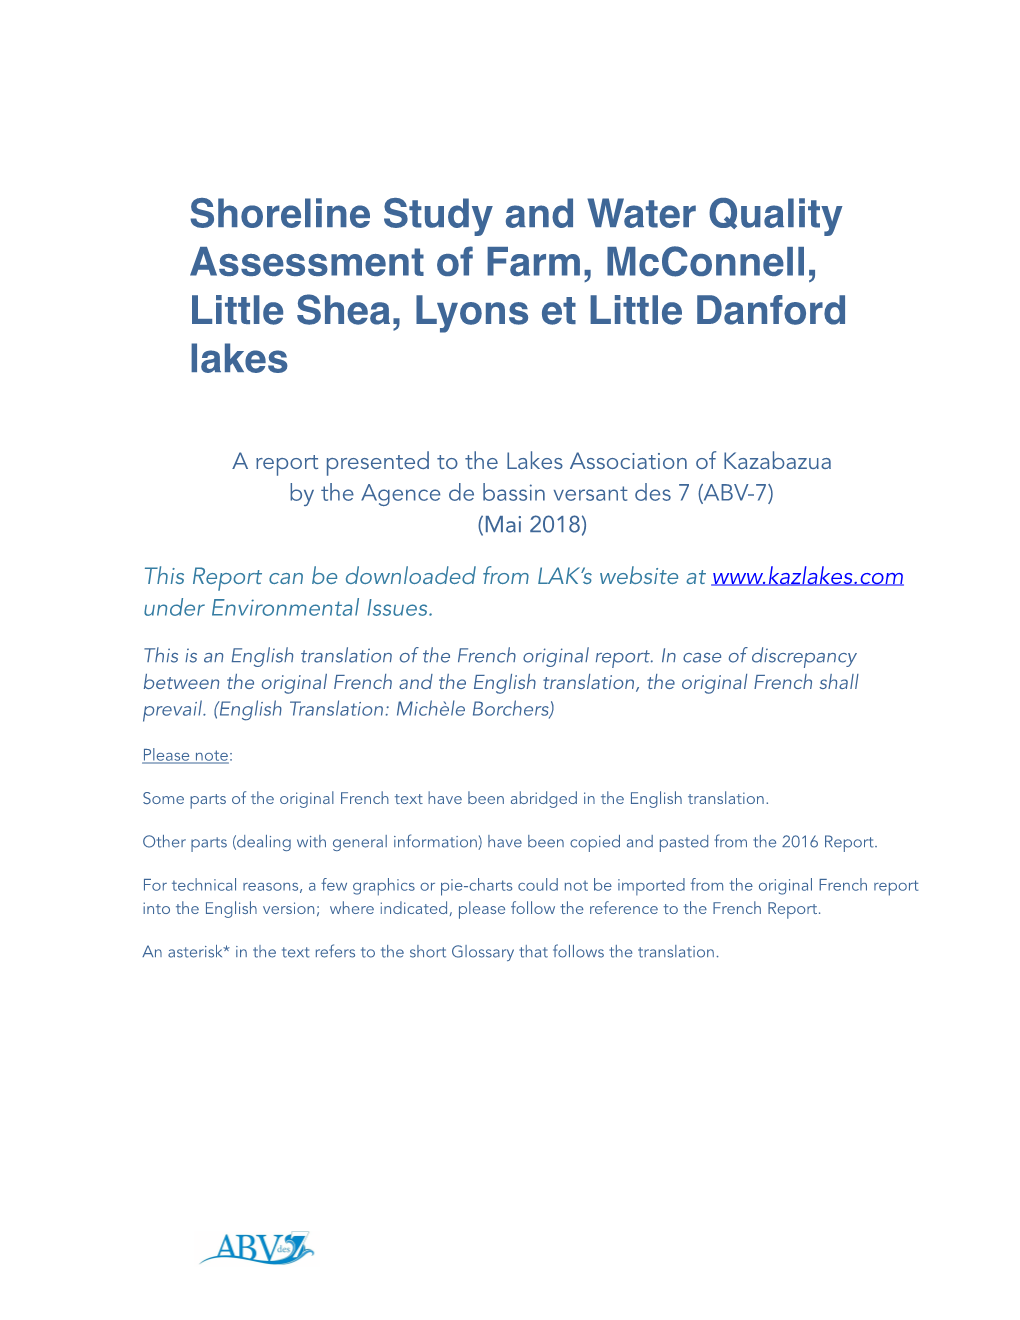 Shoreline Study and Water Quality Assessment of Farm, Mcconnell, Little Shea, Lyons Et Little Danford Lakes